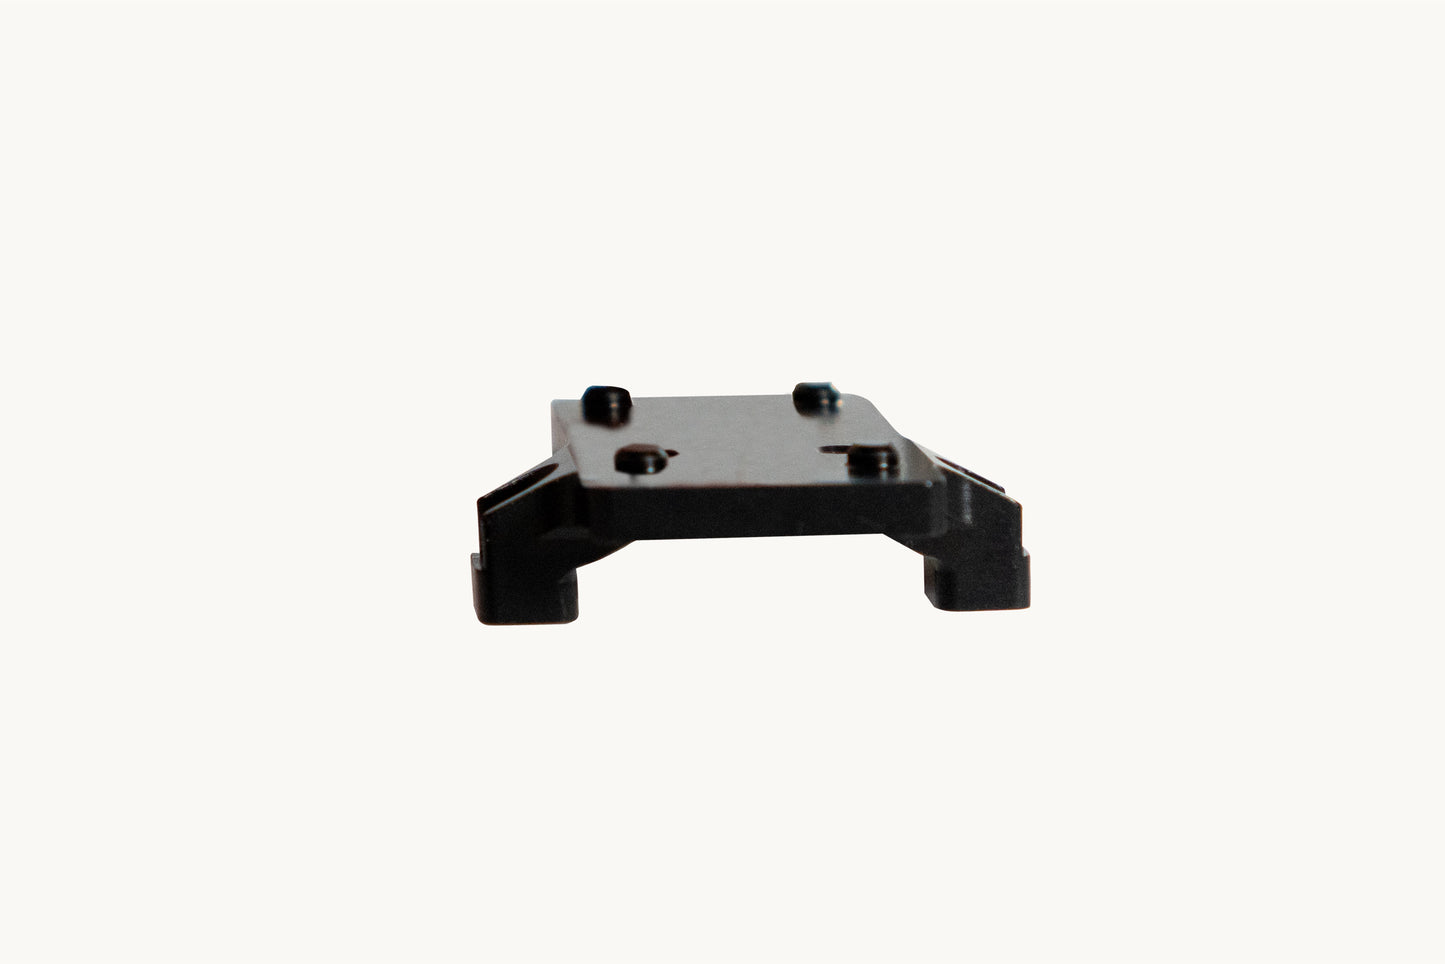 ATLAS PRO LED Sight Adapter for ACOG